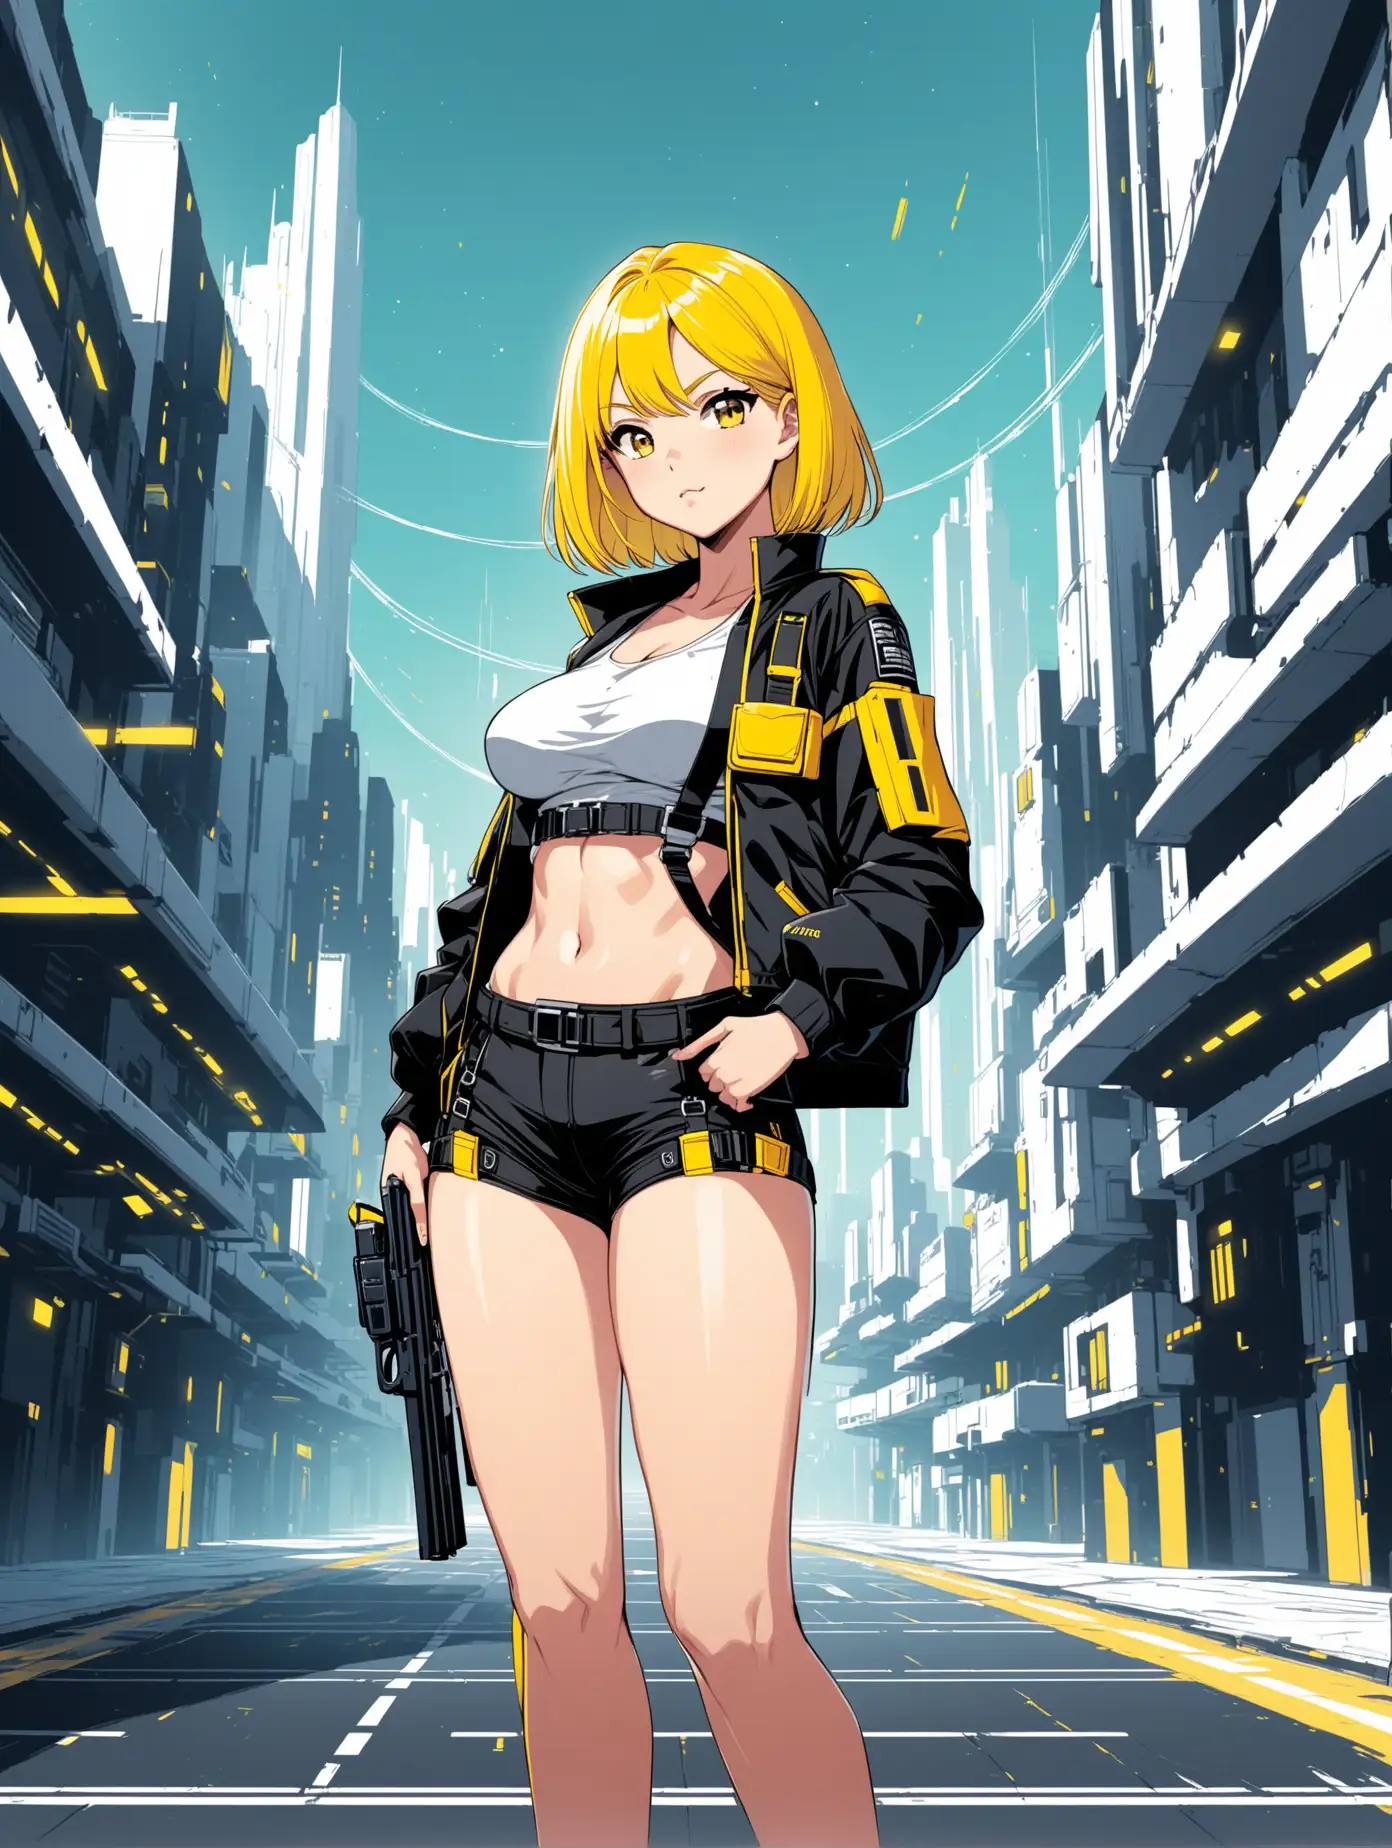 sexy fit 24 year old hero girl, short chin length yellow hair, posing in a futuristic town, wearing black members only jacket, suspenders, black shorts, guns in holsters on each thigh, yellow black white 3 color minimal design